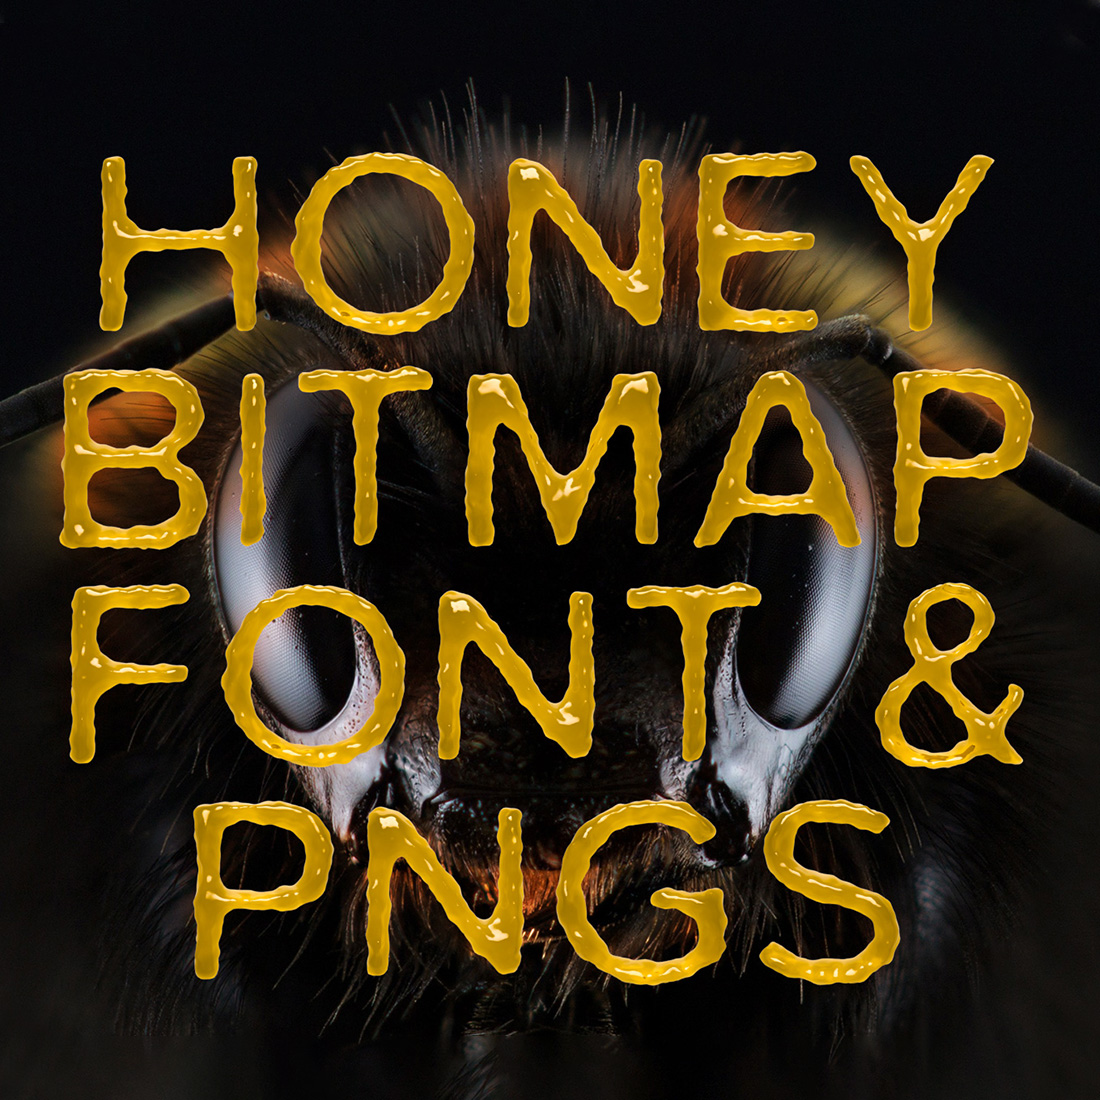 Ms Honey Bitmap Font and PNG cover image.